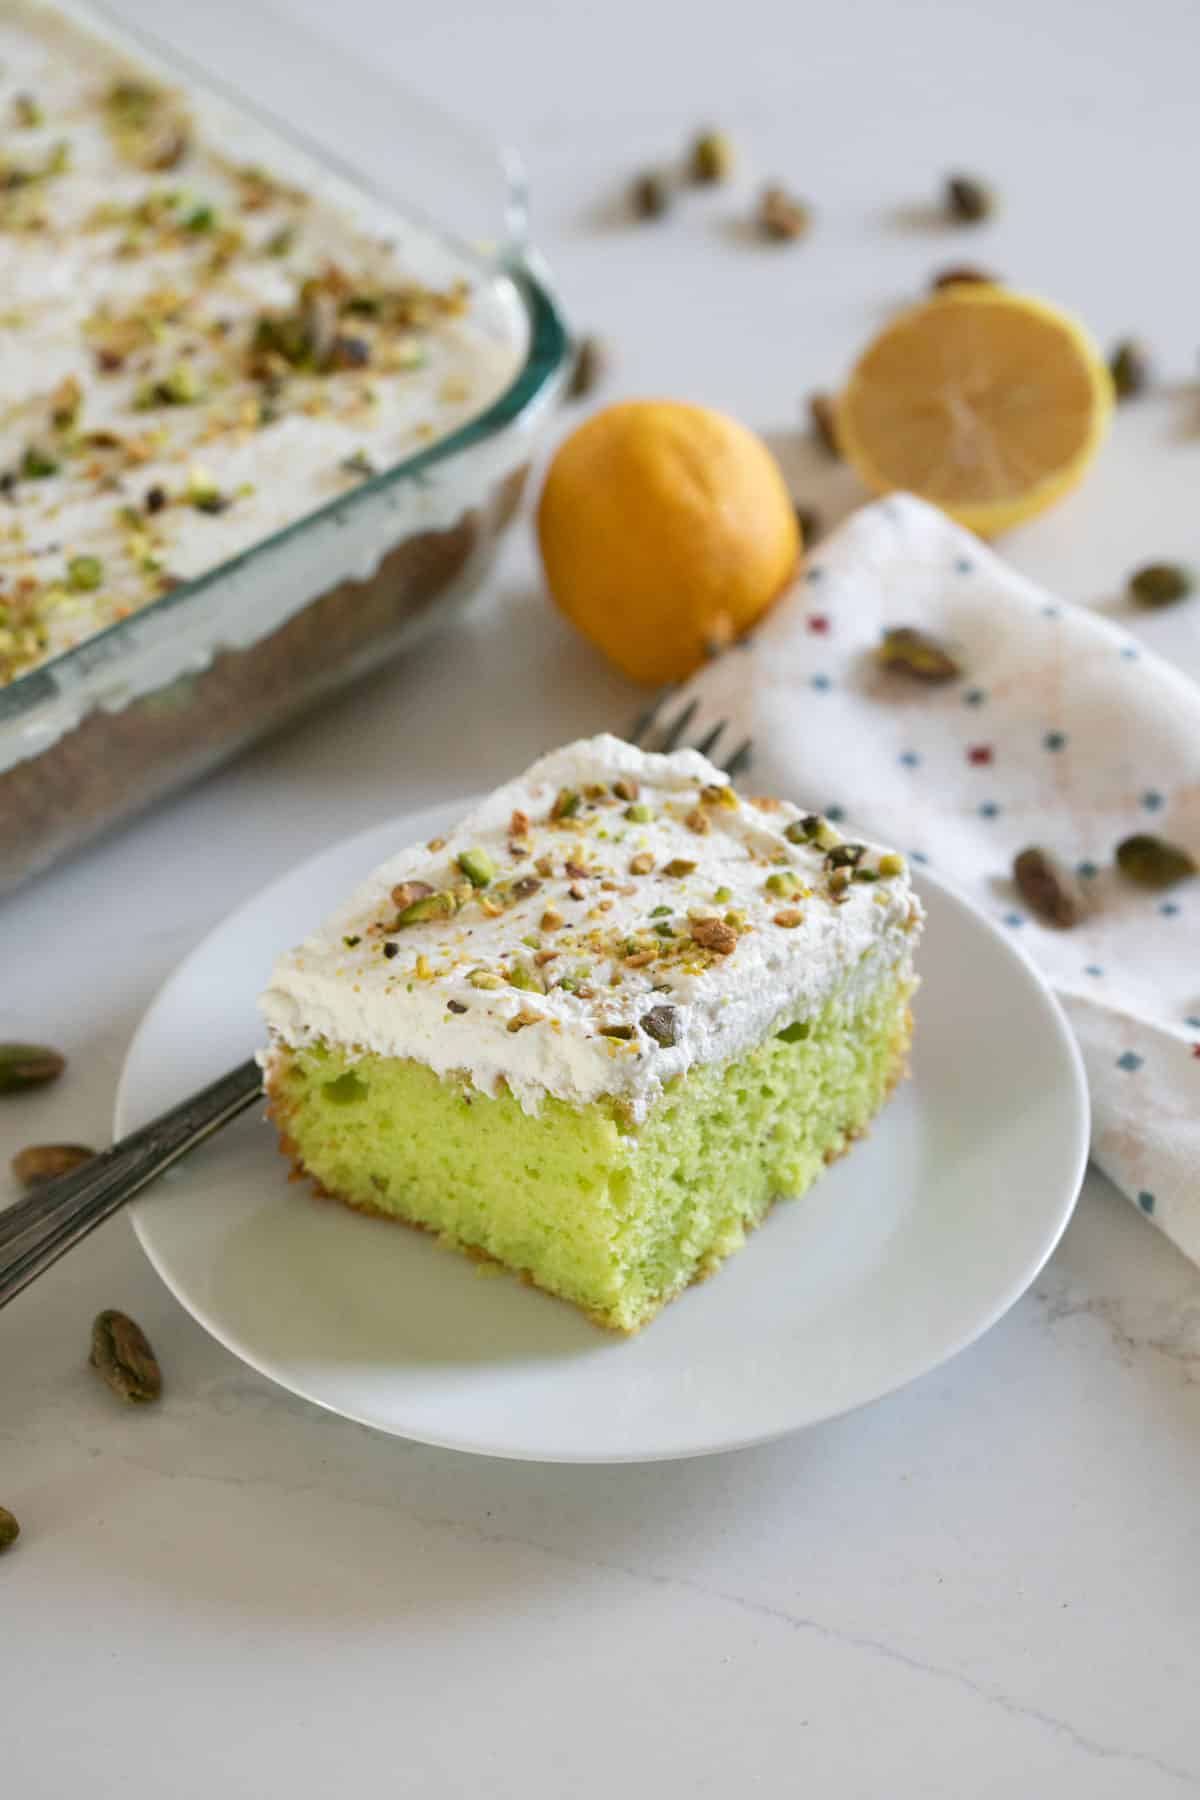 A slice of lemon pistachio cake on a white plate  with the full cake, lemons and pistachios in the background on a white napkin.